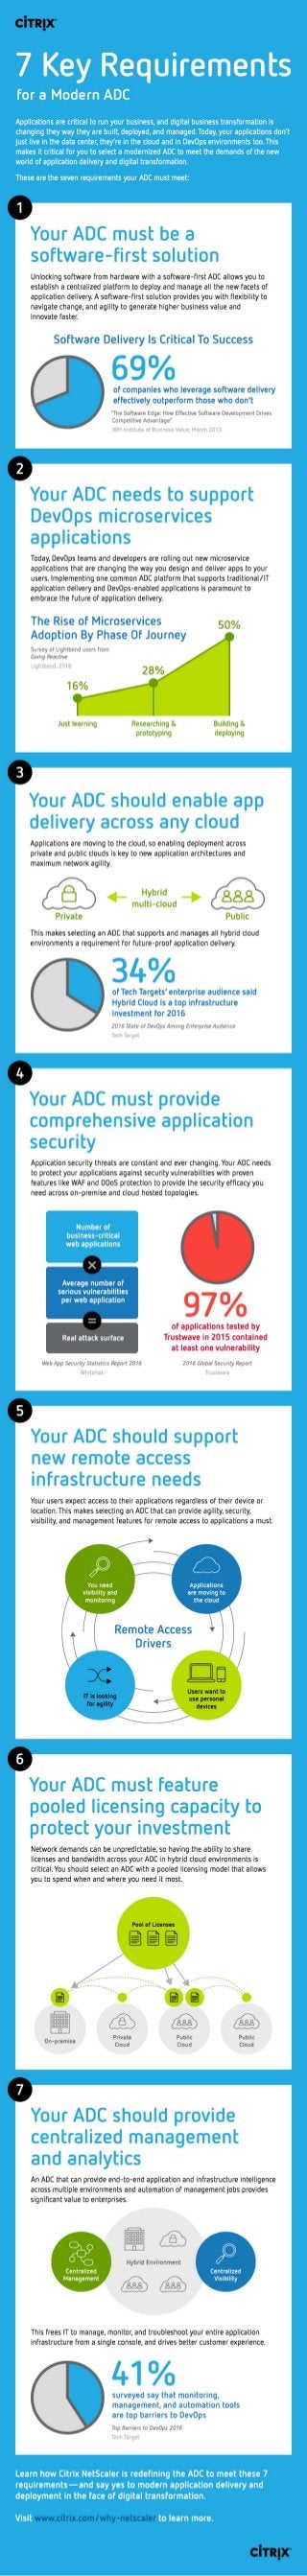 7 Key Requirements for a Modern ADC